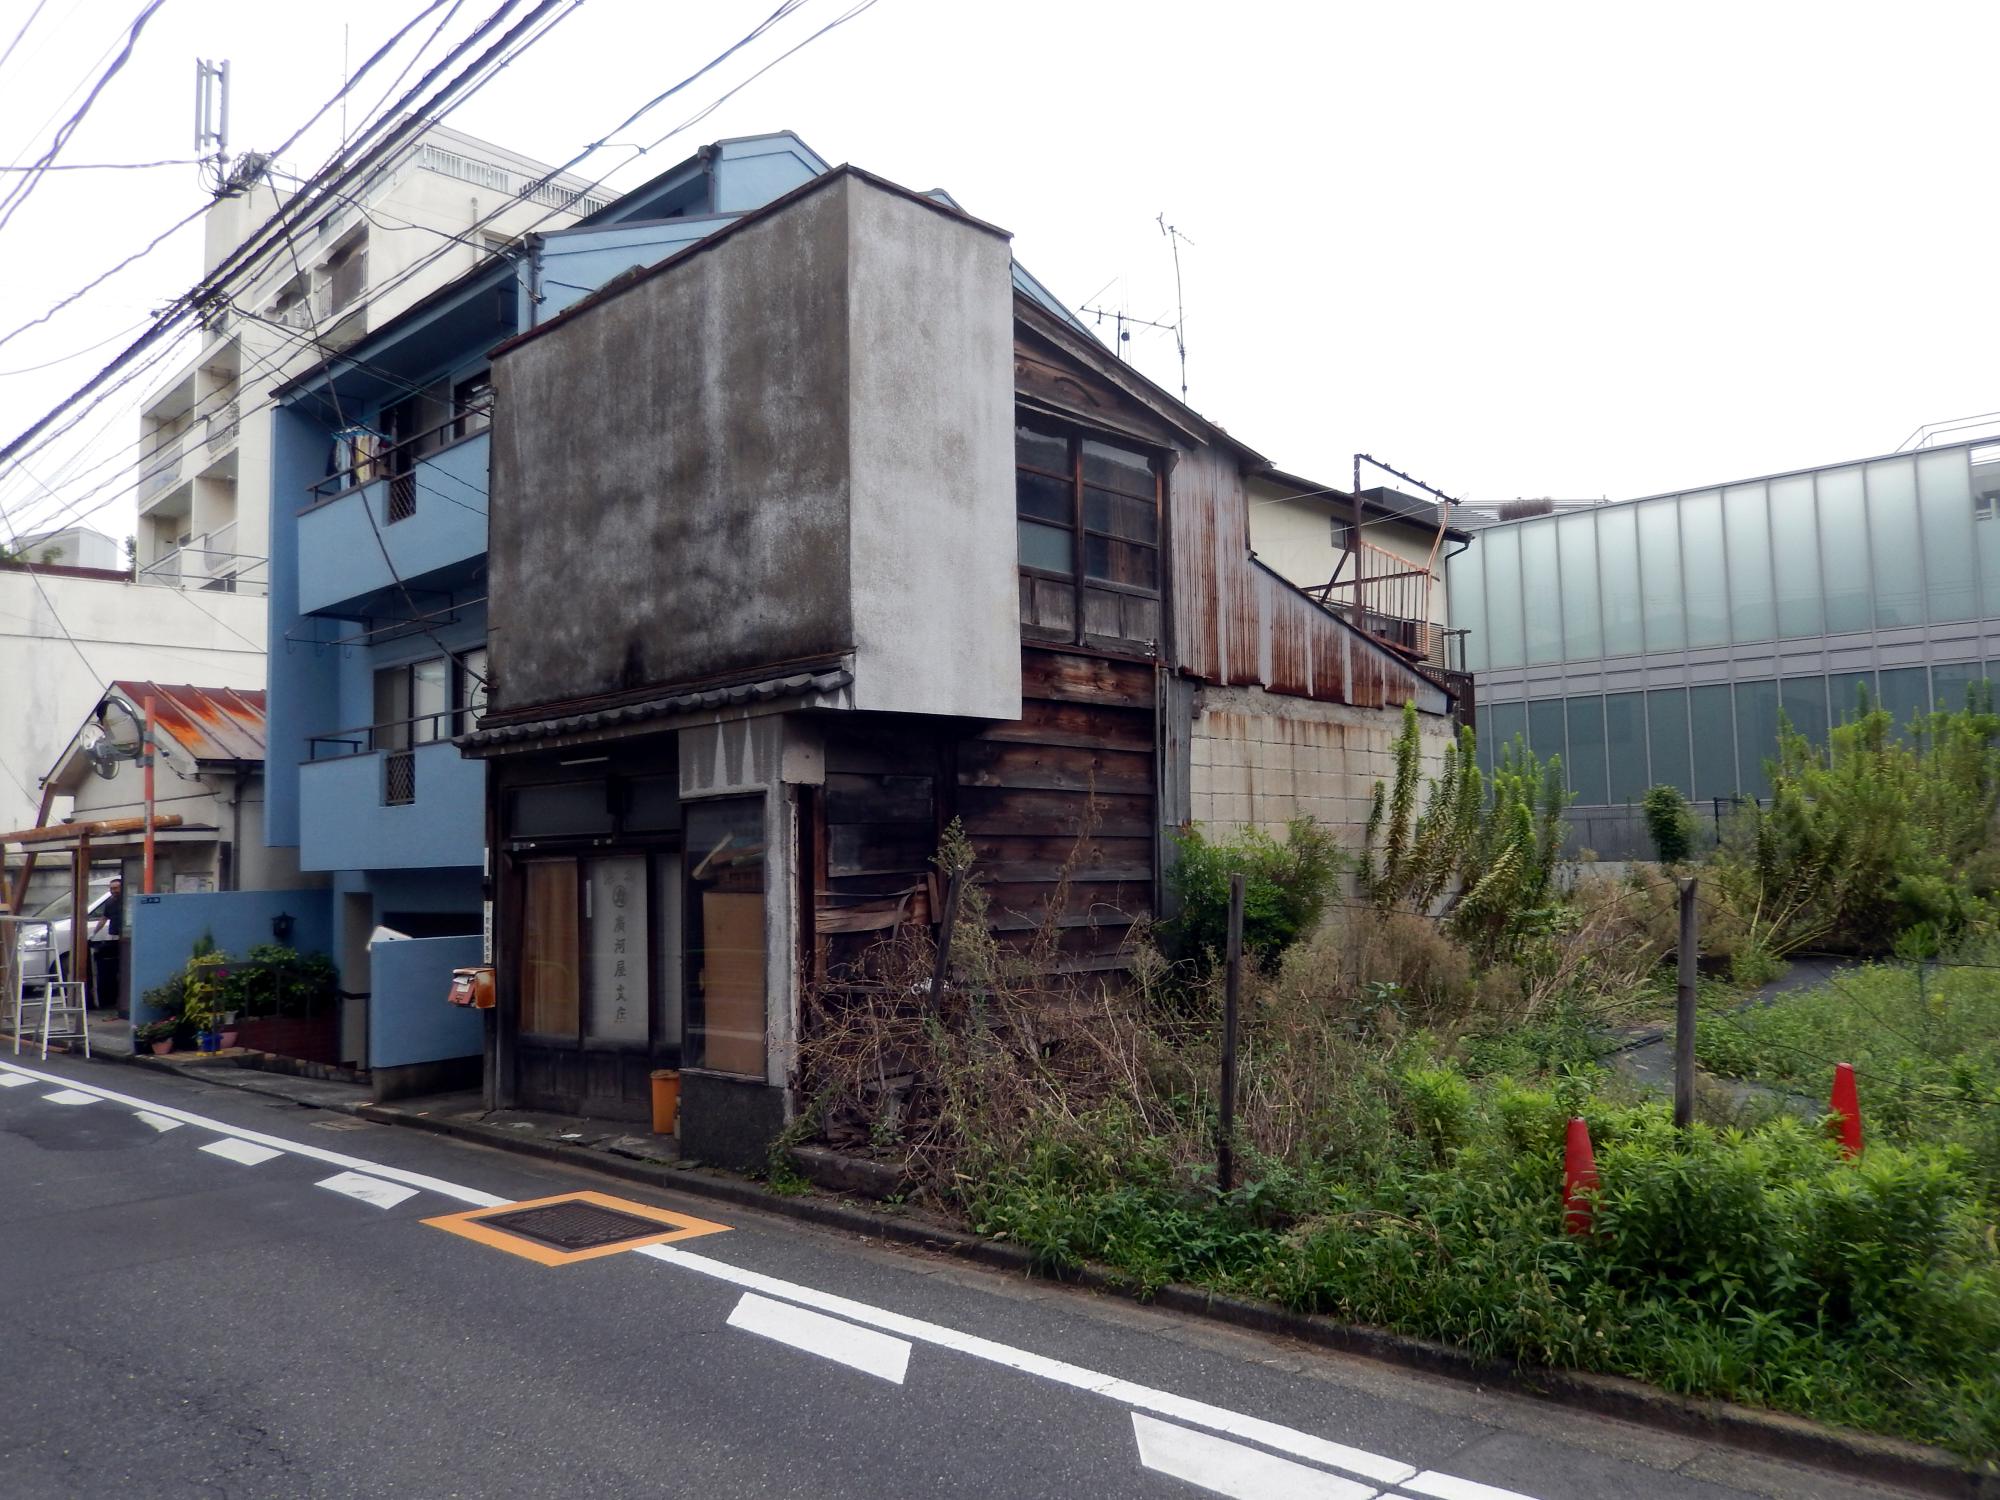 Tokyo (2015) - Old House